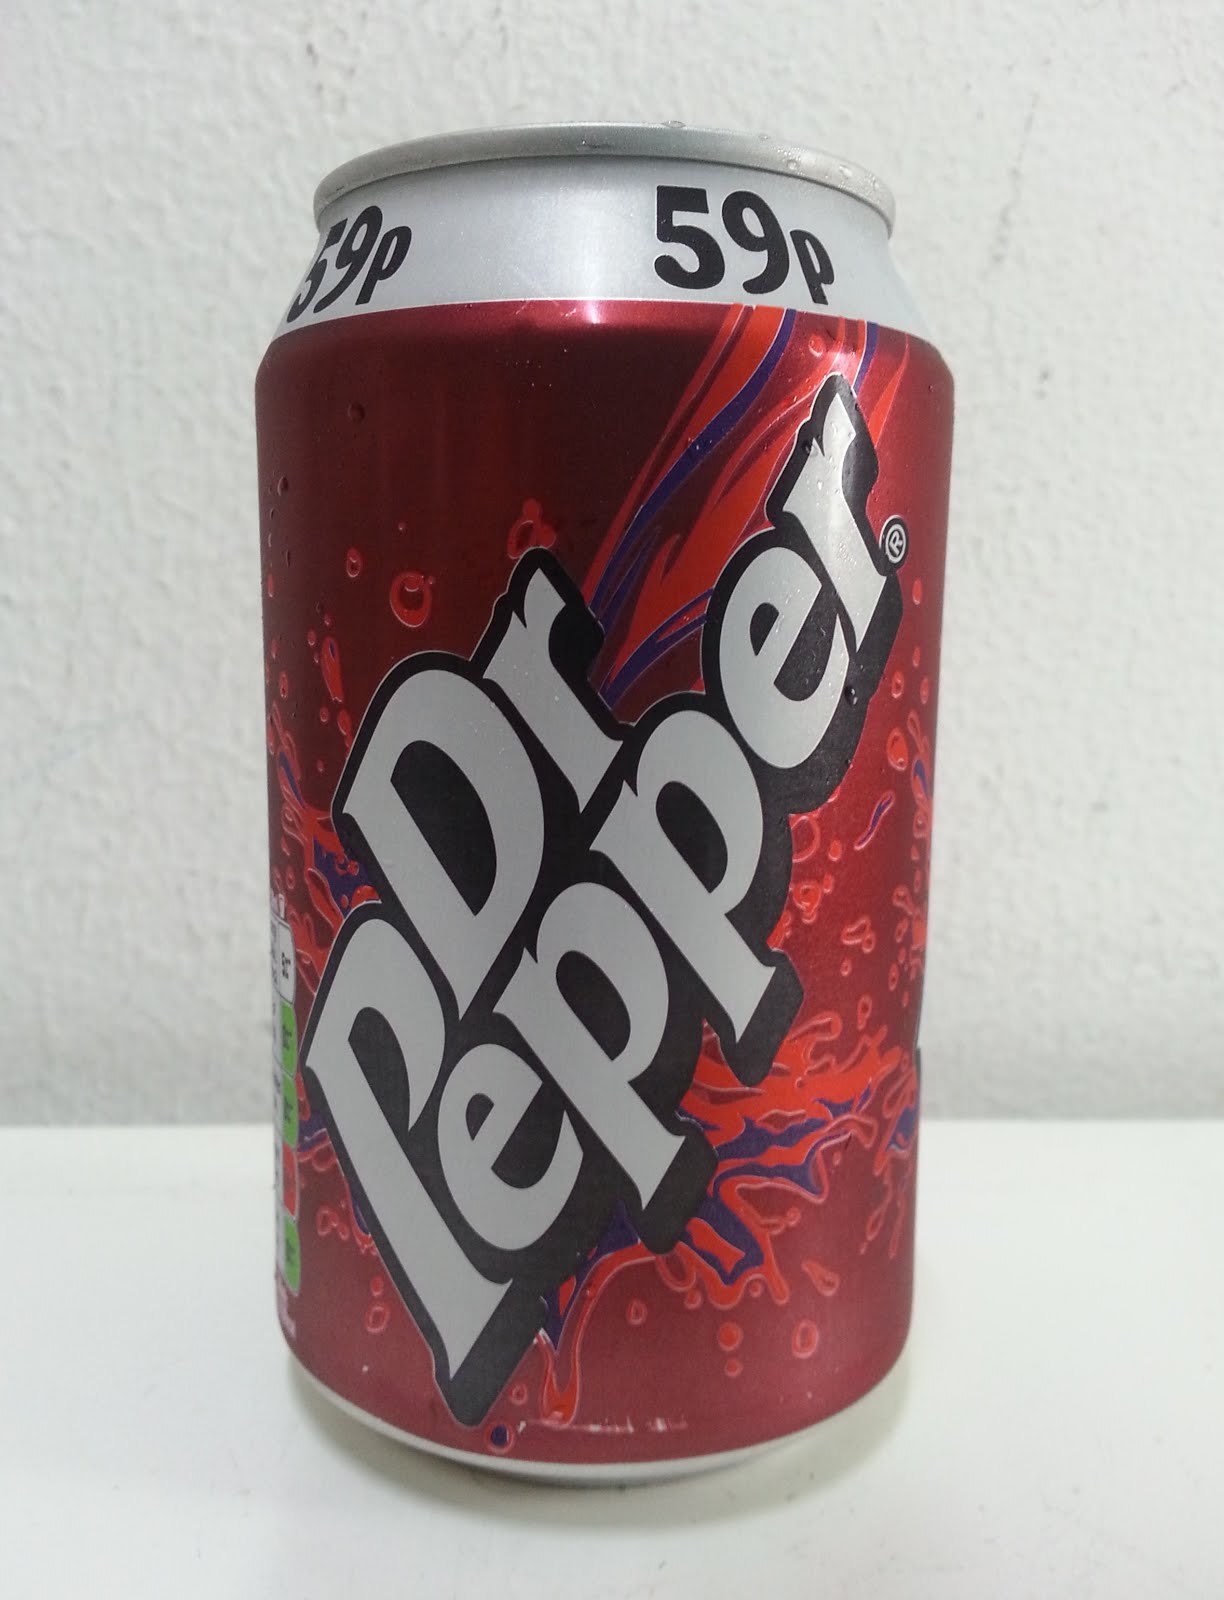 Does dr pepper have caffeine